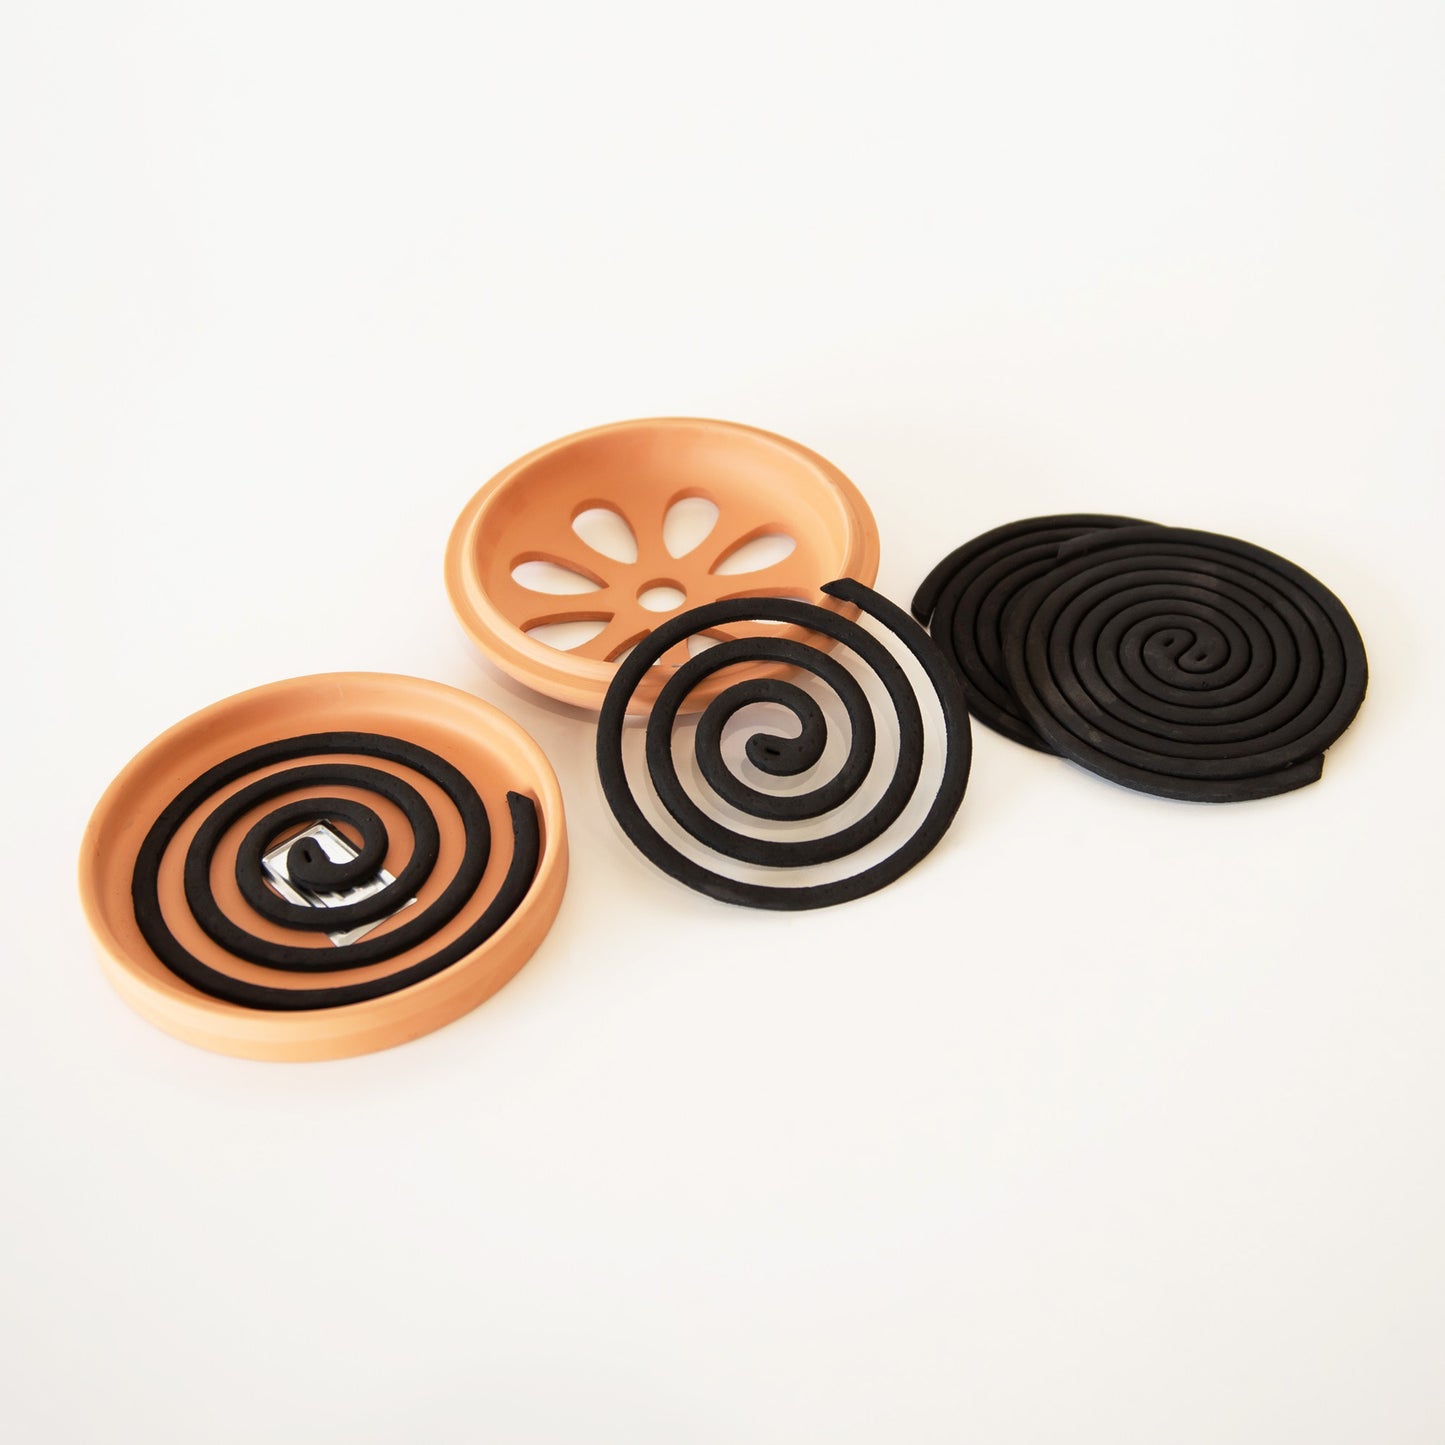 Set of 2 Terracotta Coil Burners with Citronella Coils